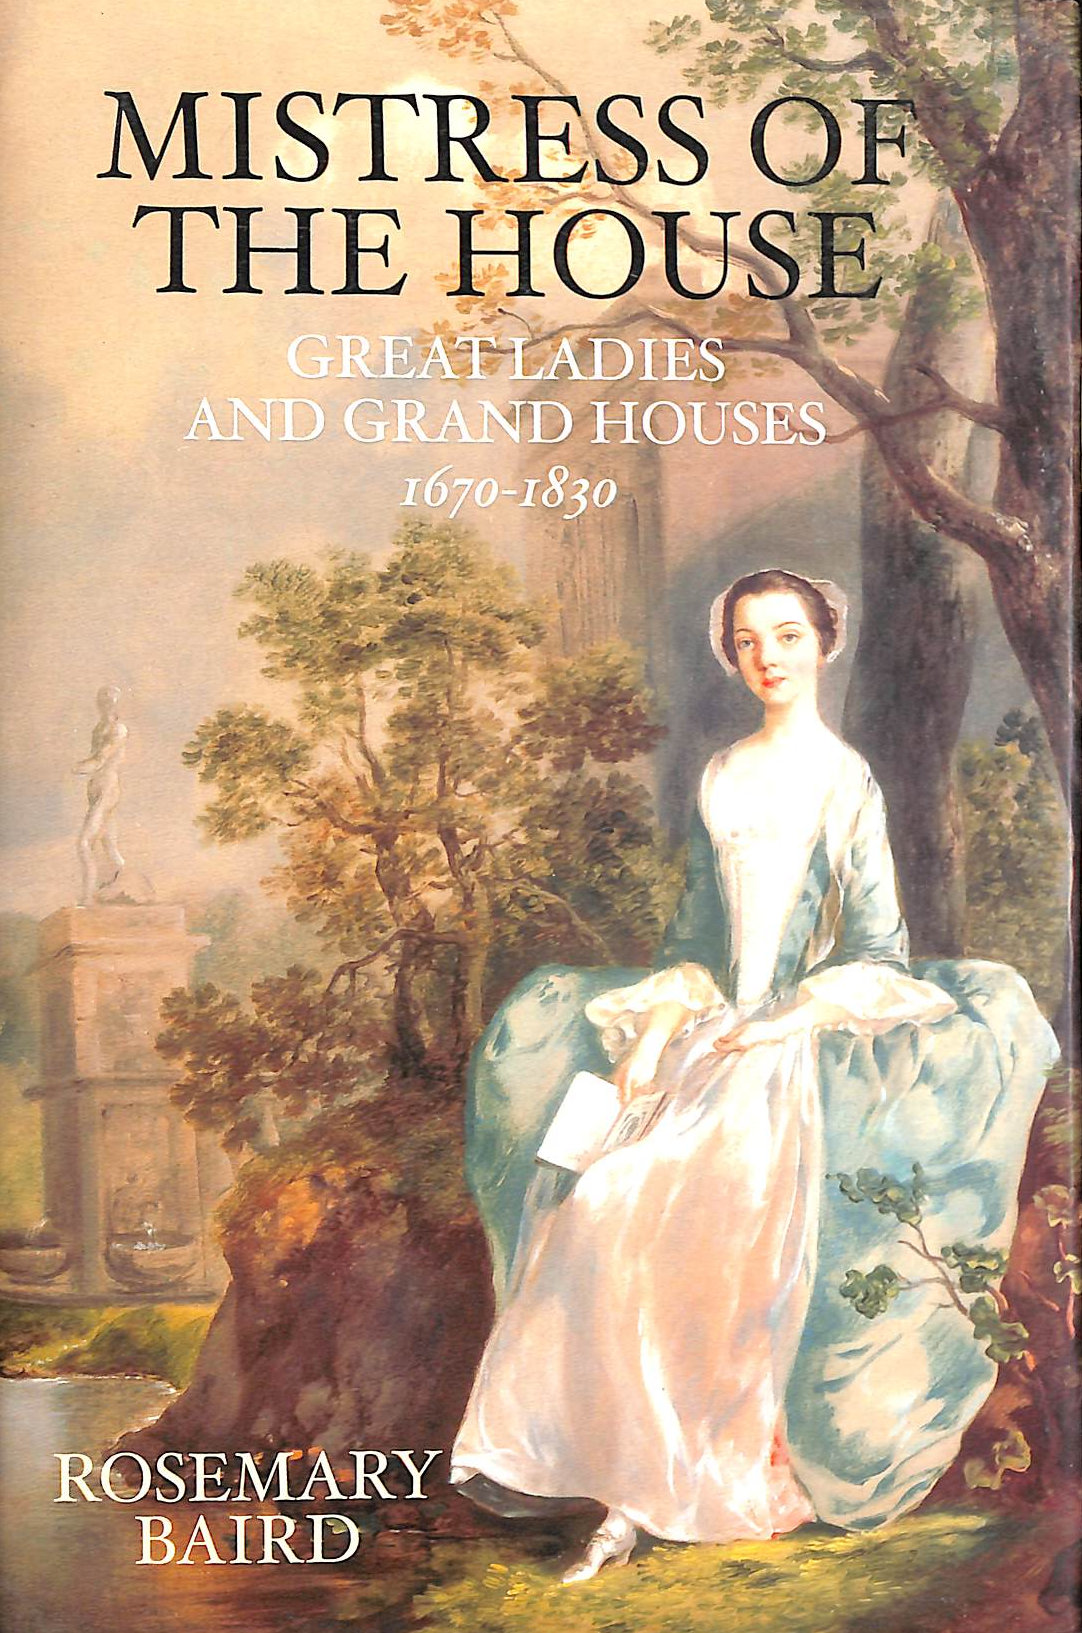 BAIRD, ROSEMARY - Mistress of the House: Great Ladies and Grand Houses 1670-1830